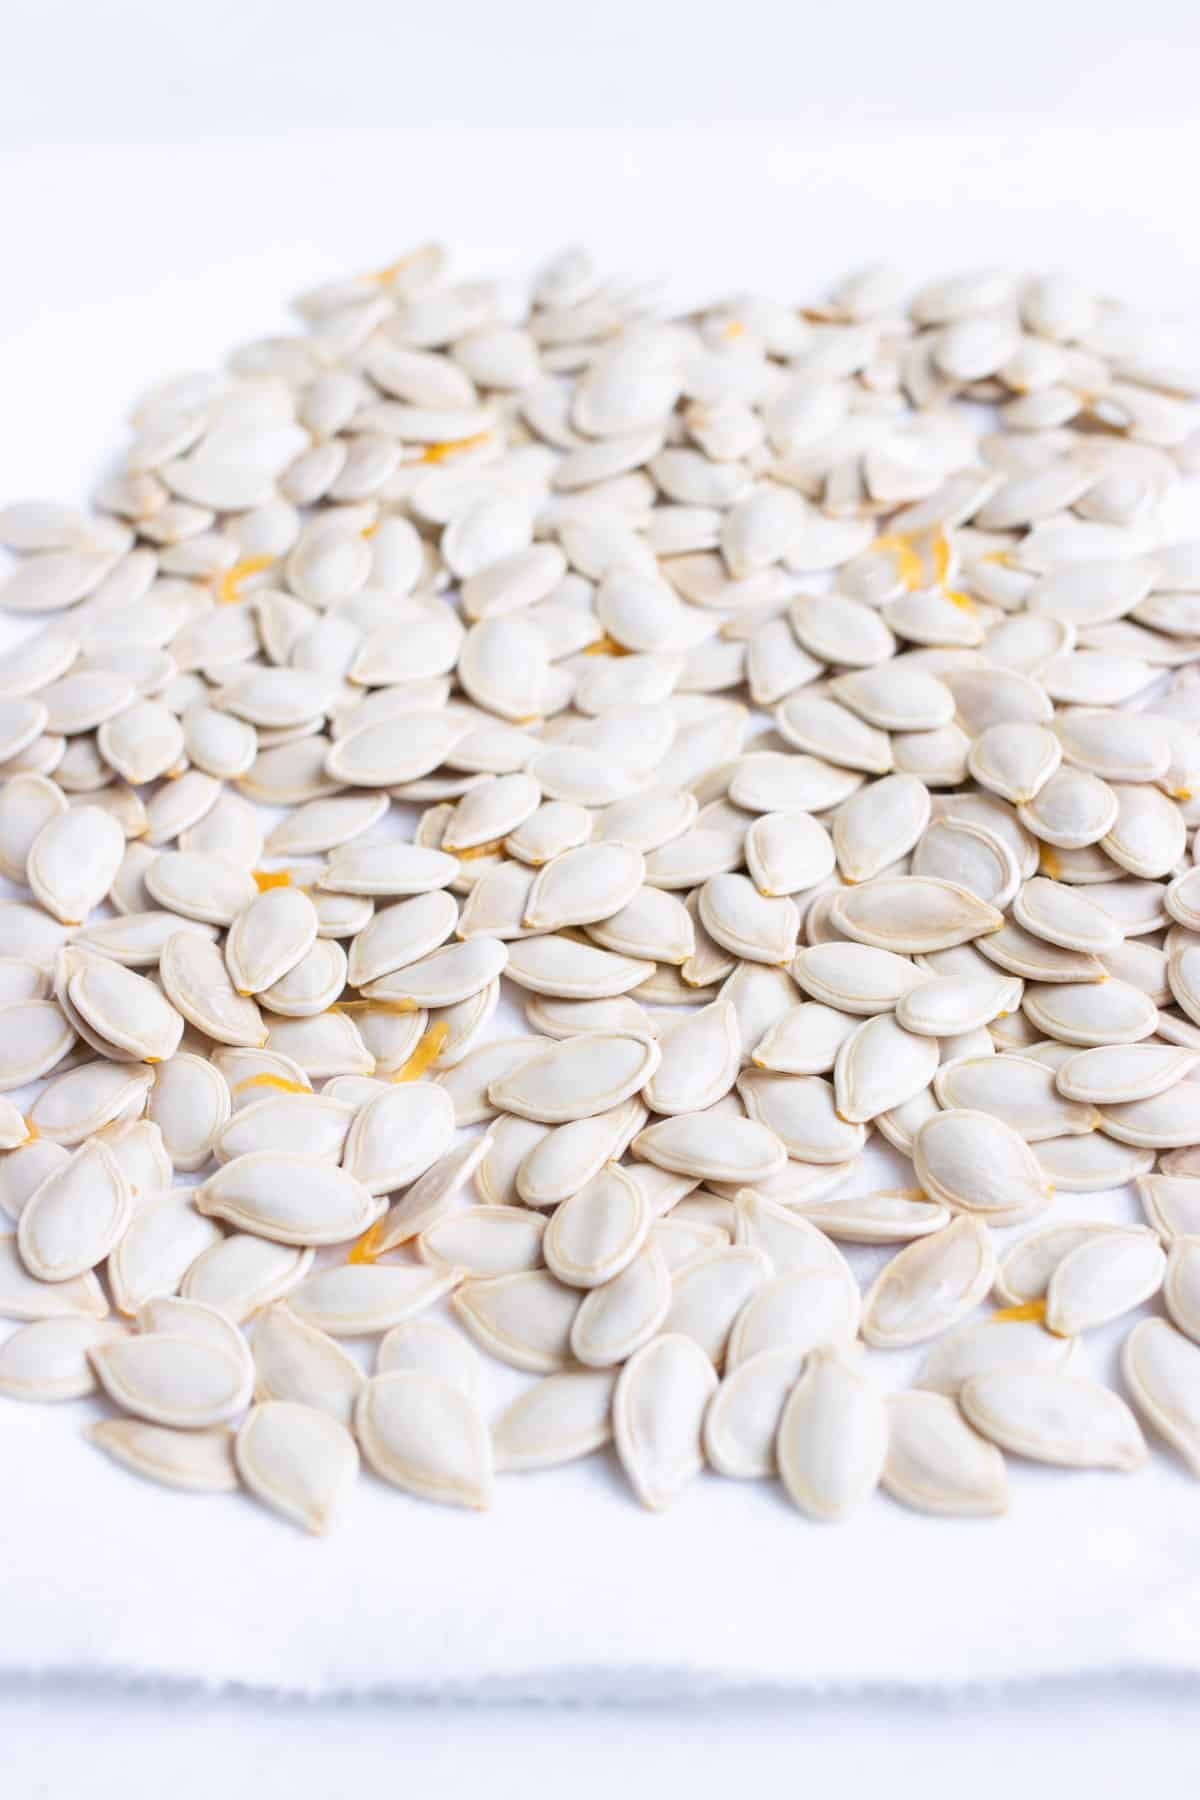 Pumpkin seeds are dried on a paper towel or dish towel.